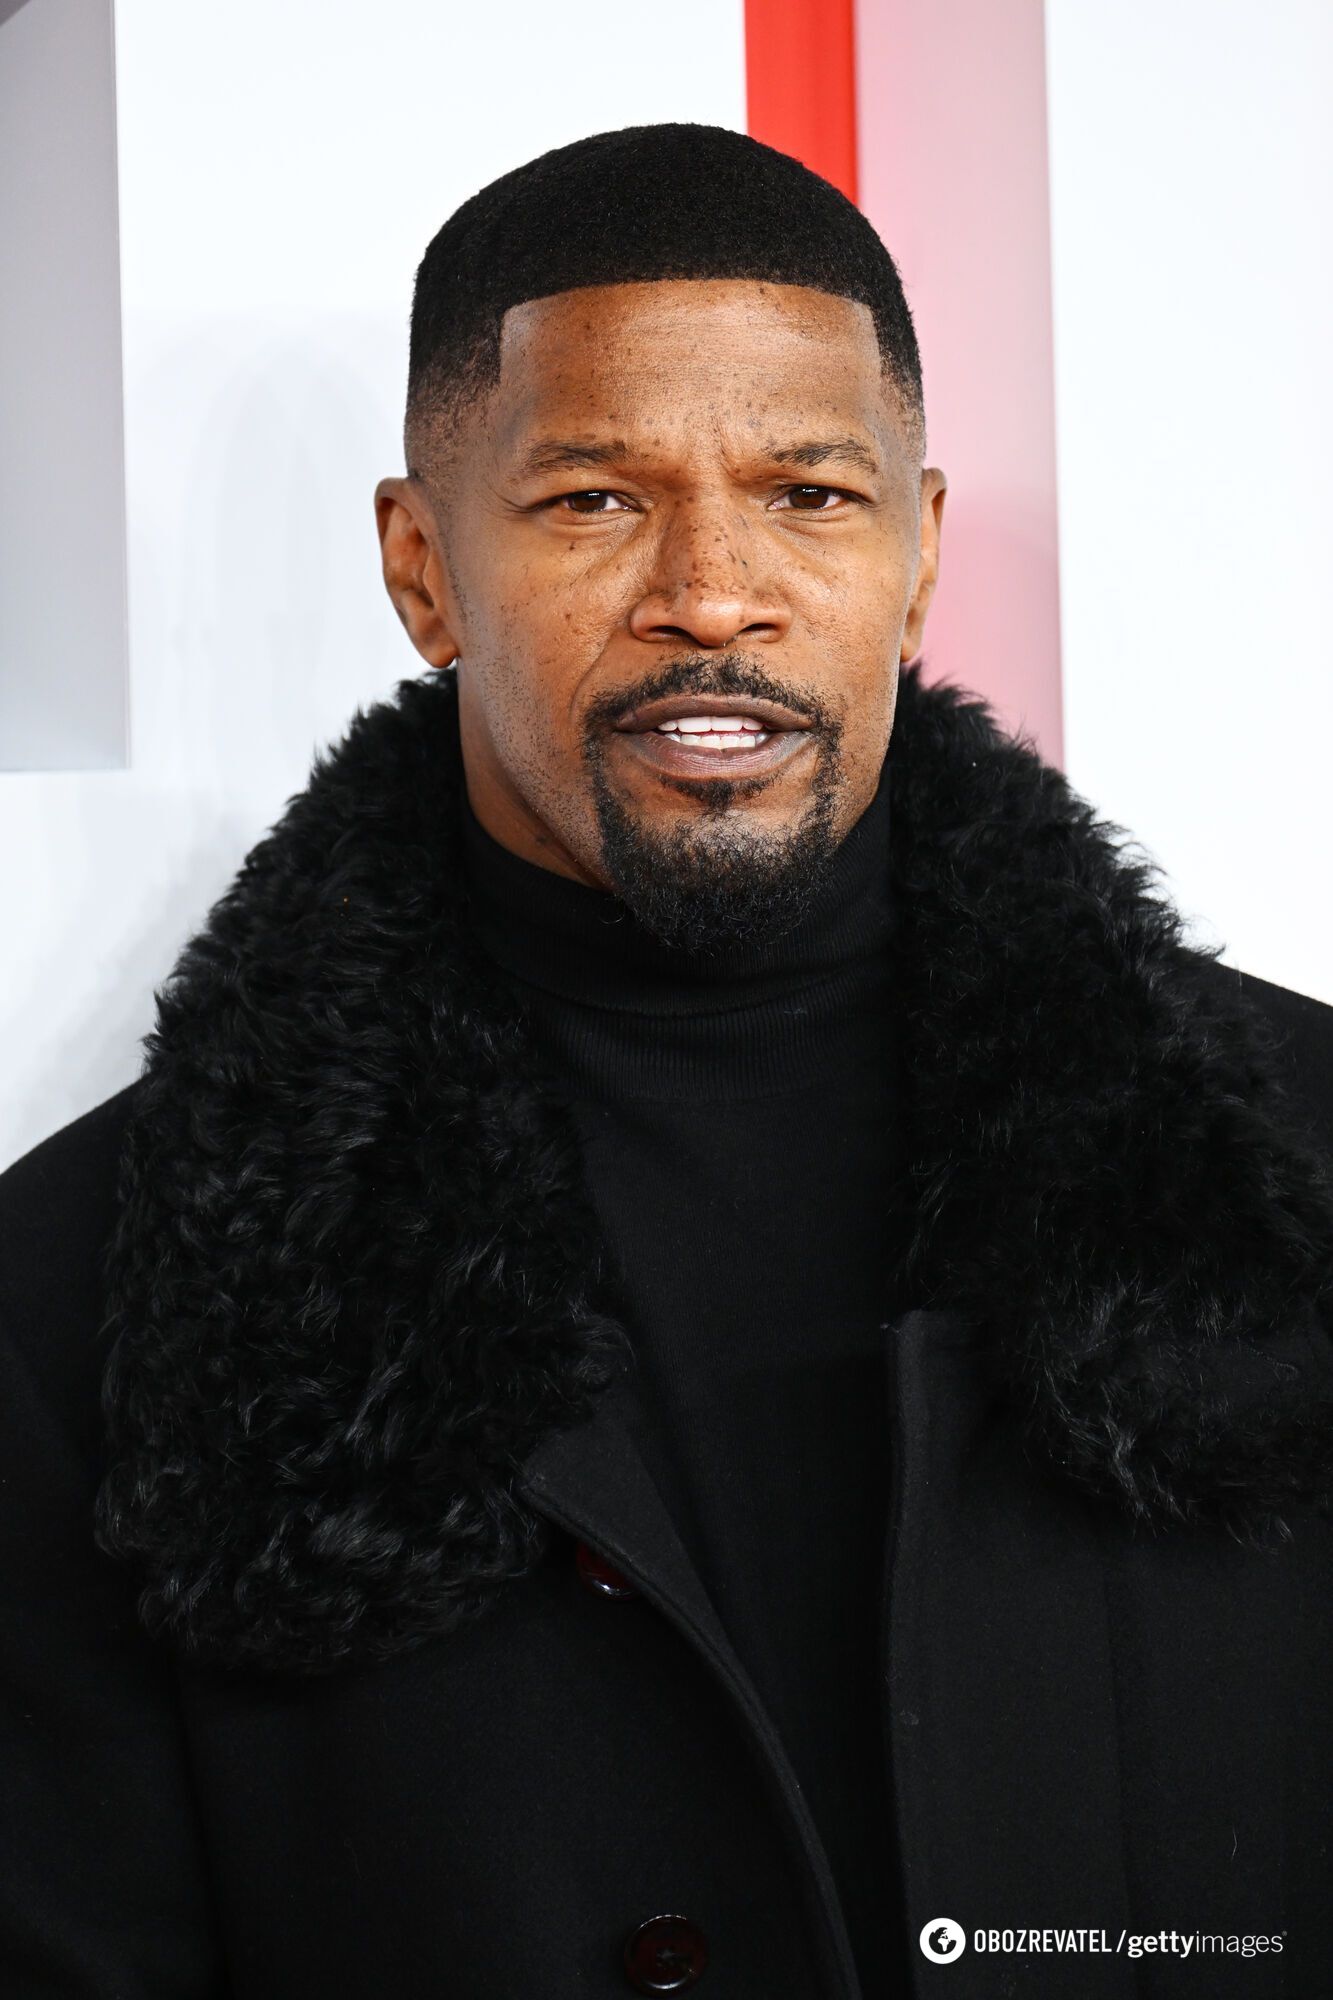 Oscar-winning actor Jamie Foxx accused of rape: what is known